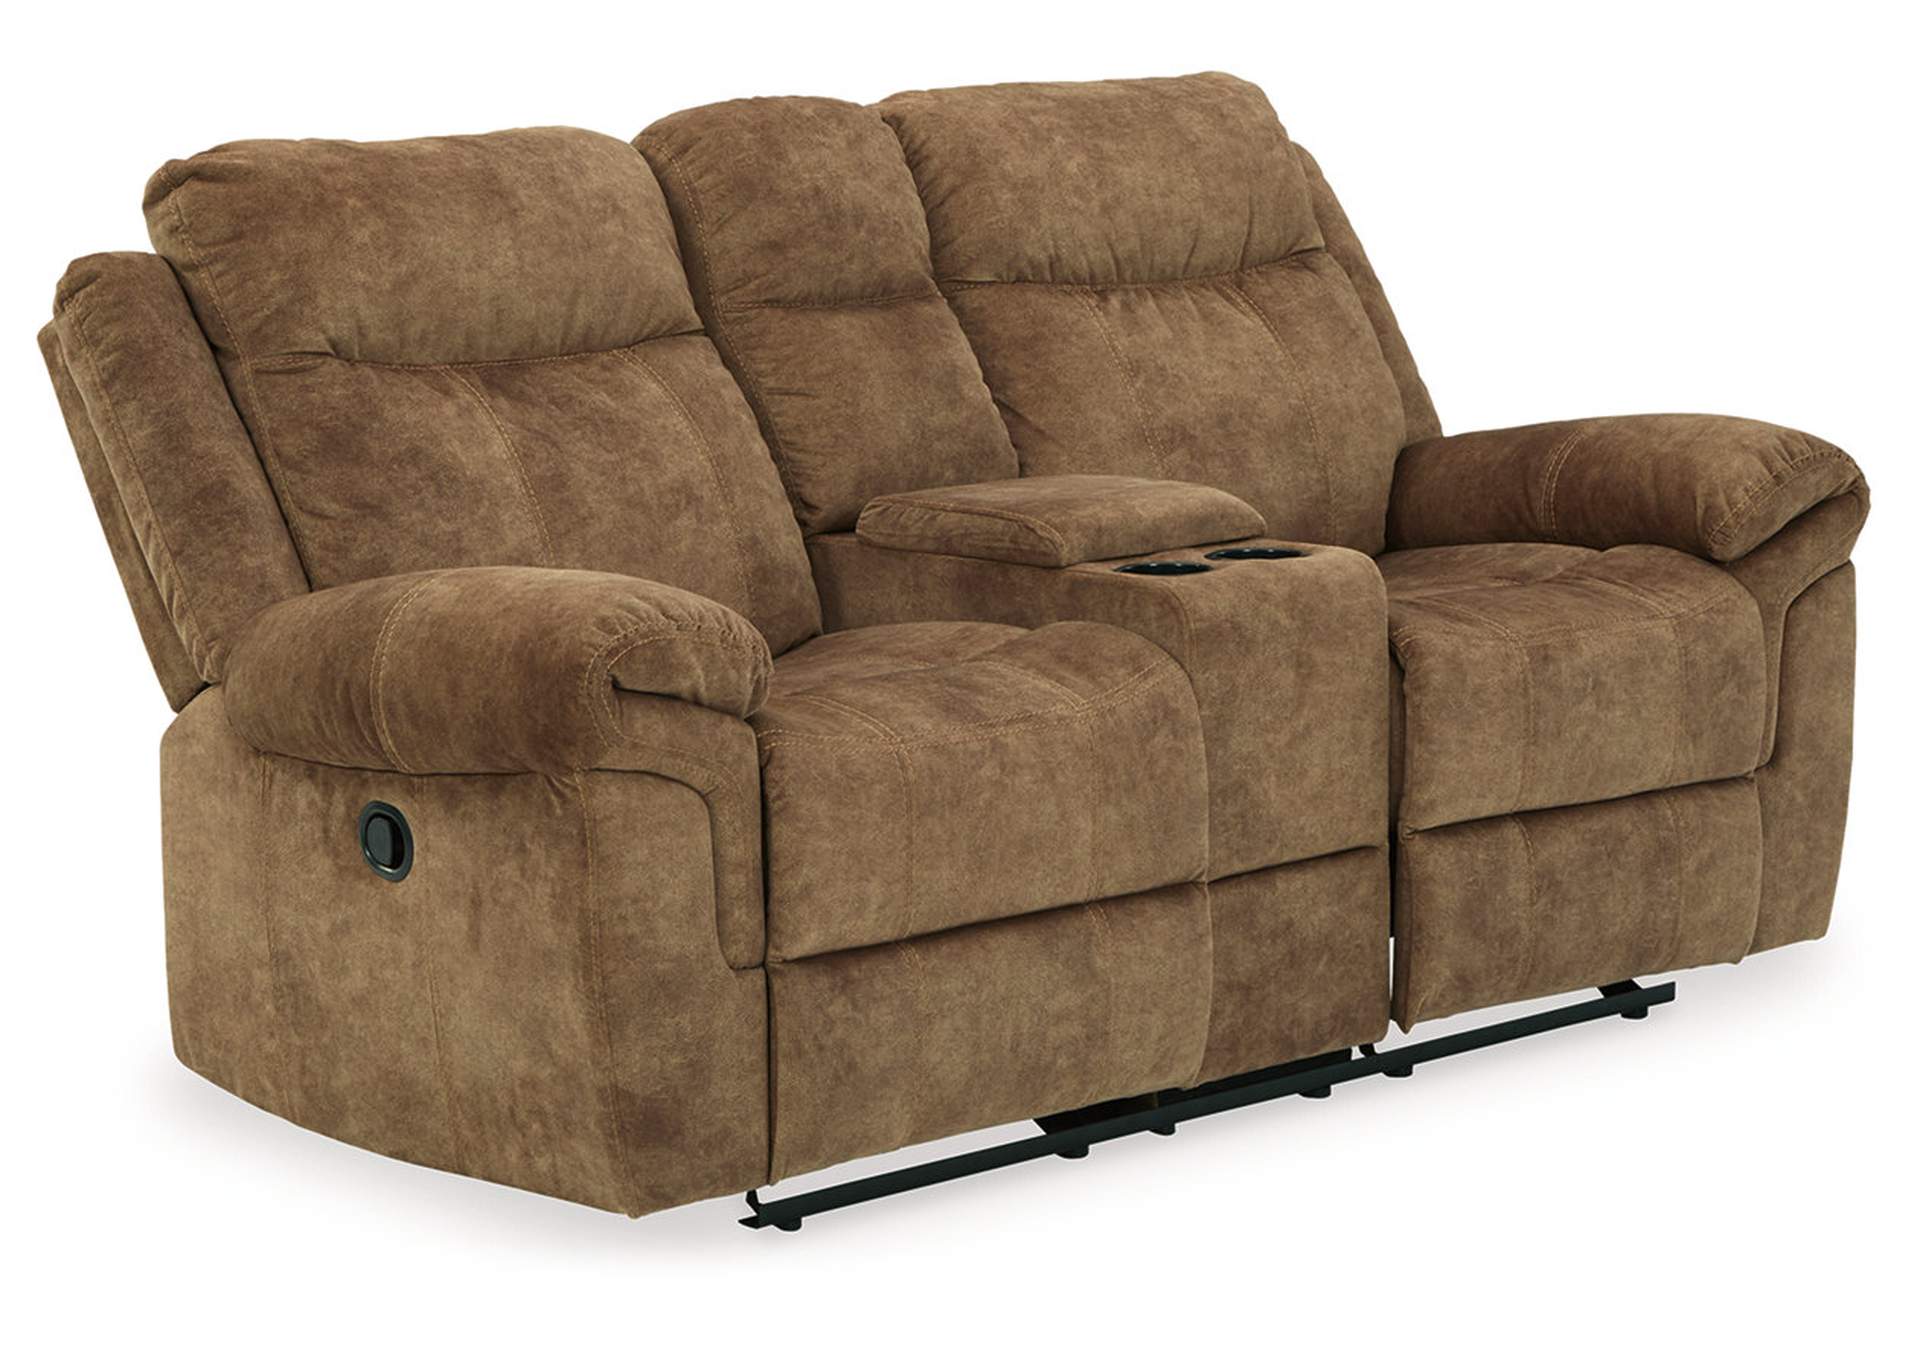 Huddle-Up Sofa, Loveseat and Recliner,Signature Design By Ashley